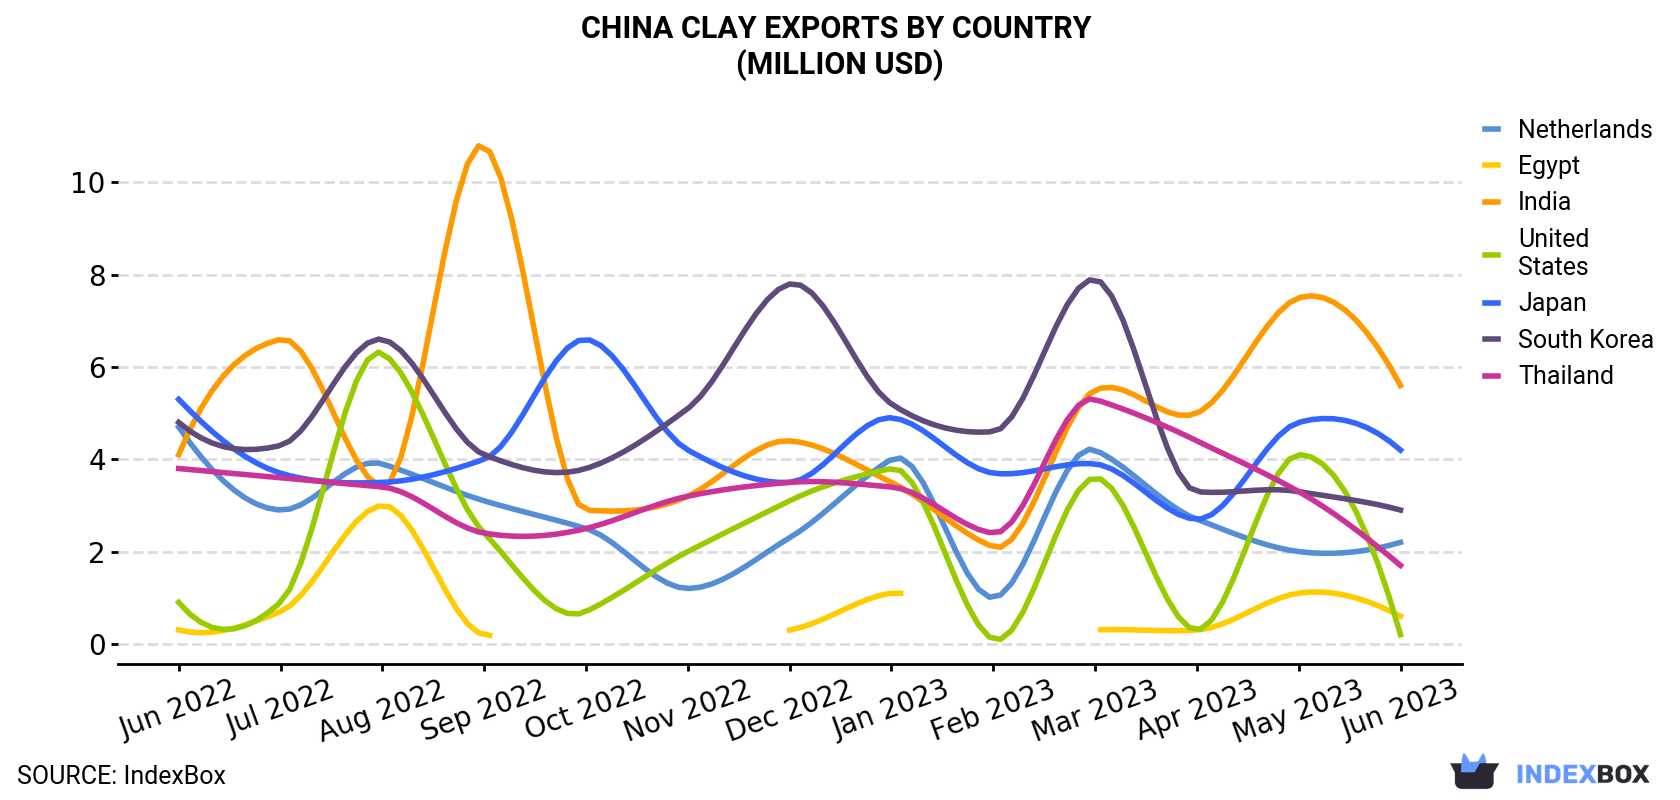 China Clay Exports By Country (Million USD)